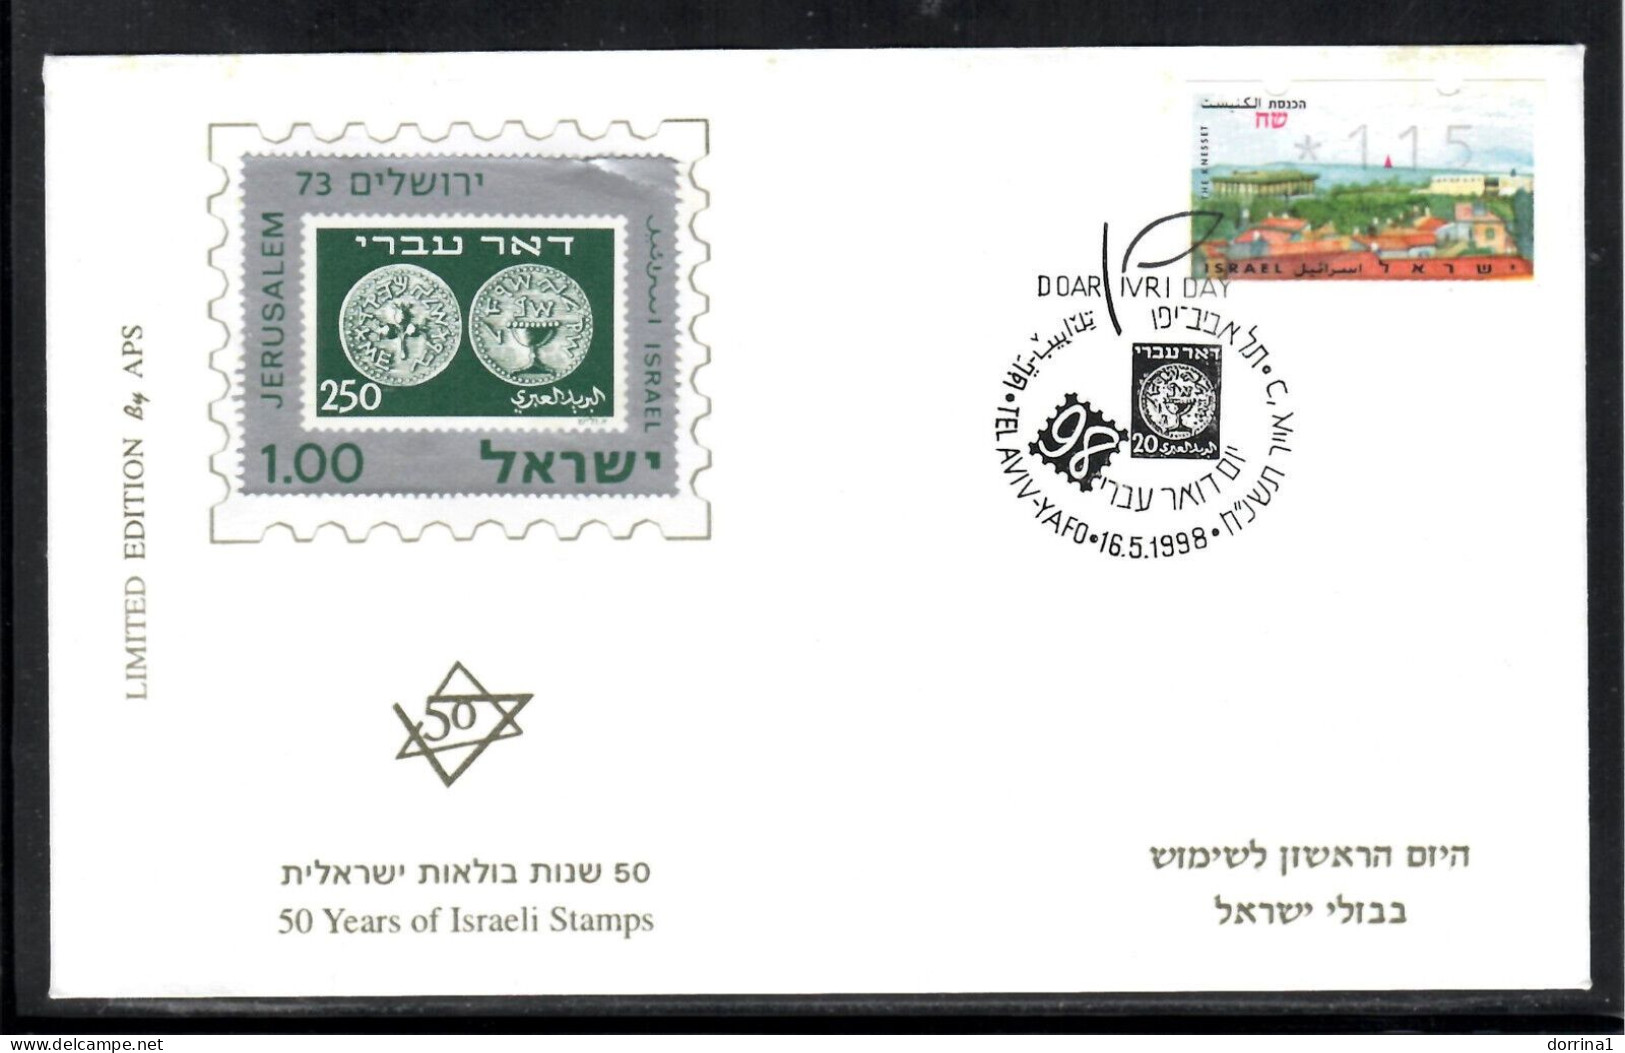 Doar Ivri Day May 16 1998 Cover Israel Limited Edition 300 Covers Only No. 0106 - Briefe U. Dokumente